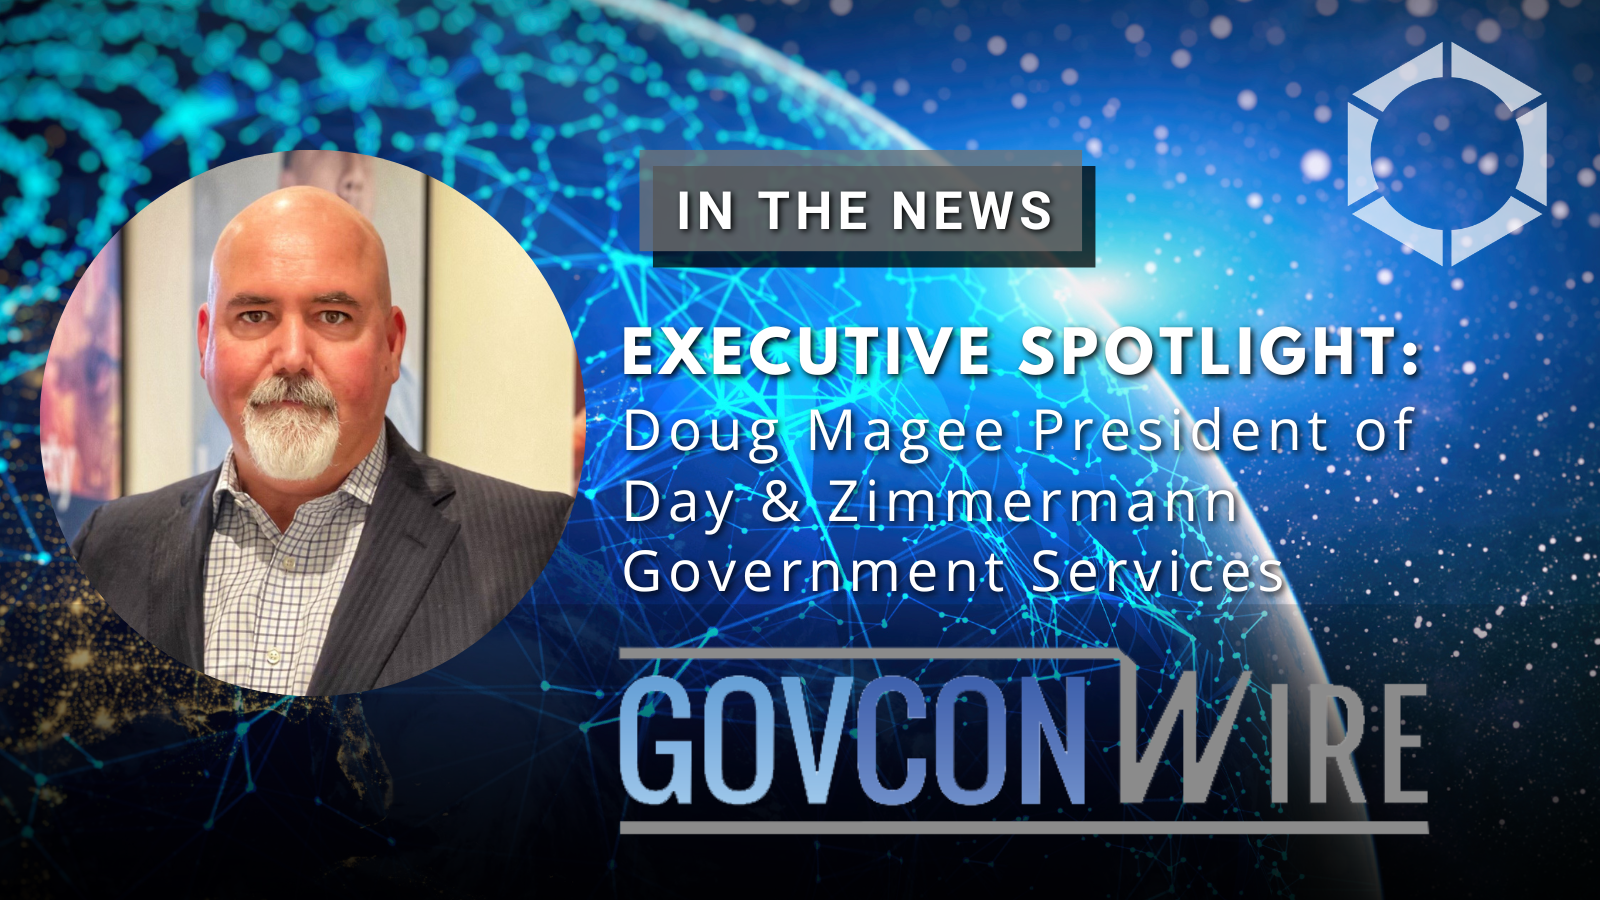 In the News: Day & Zimmermann Government Services President Doug Magee Illuminates the Company’s Range of Support for National Security